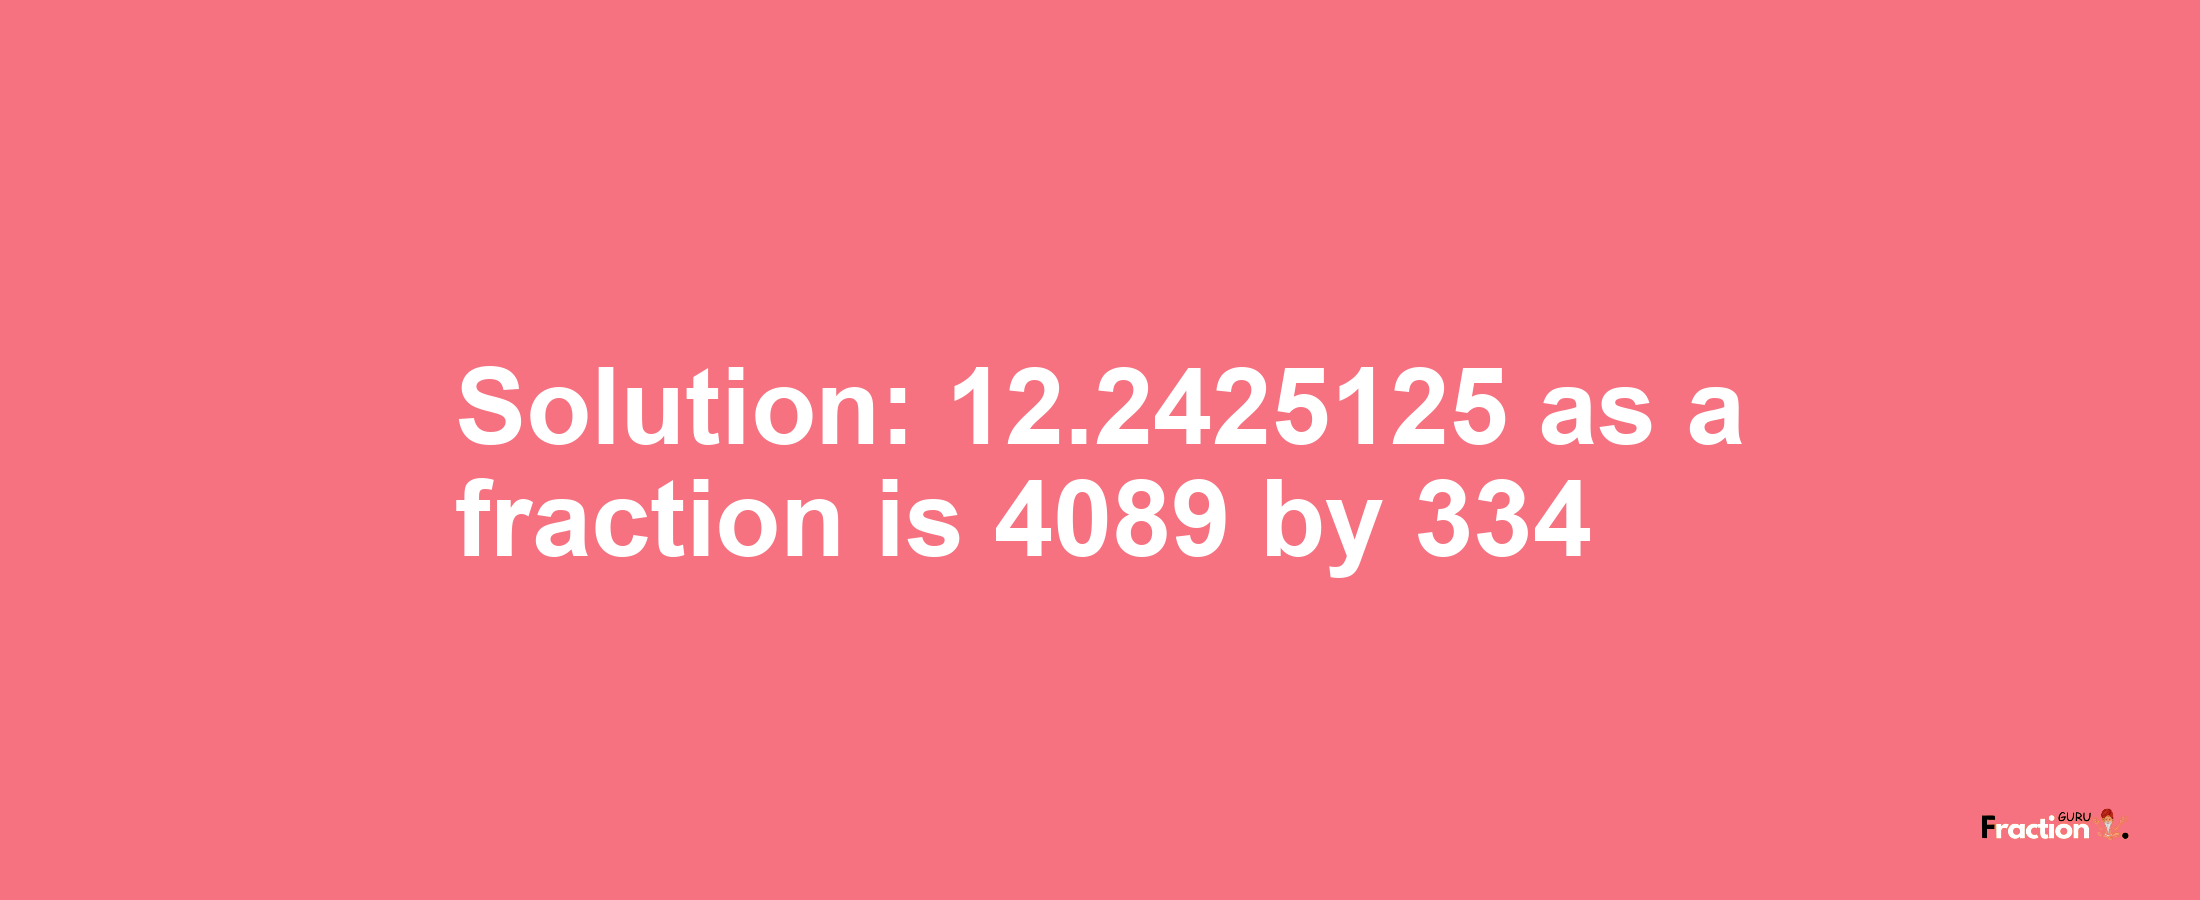 Solution:12.2425125 as a fraction is 4089/334